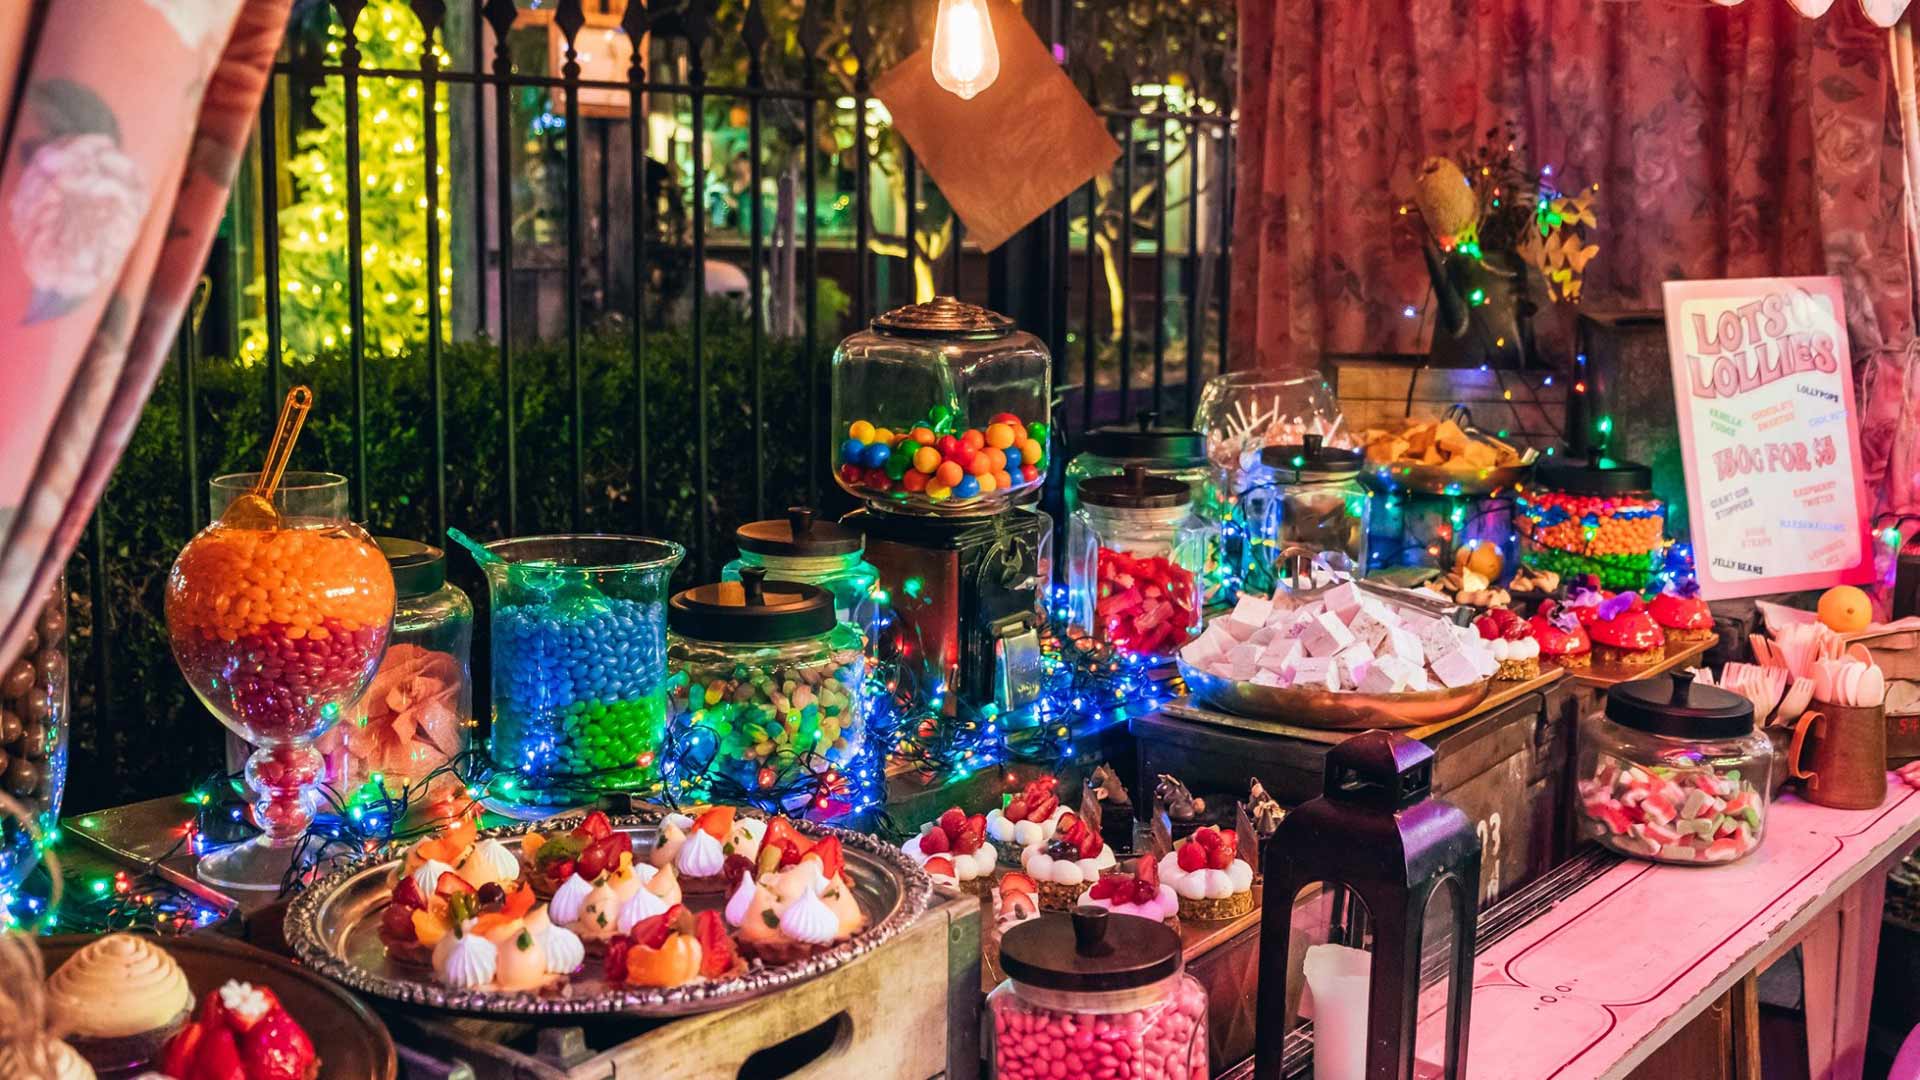 The Garden of Sweets